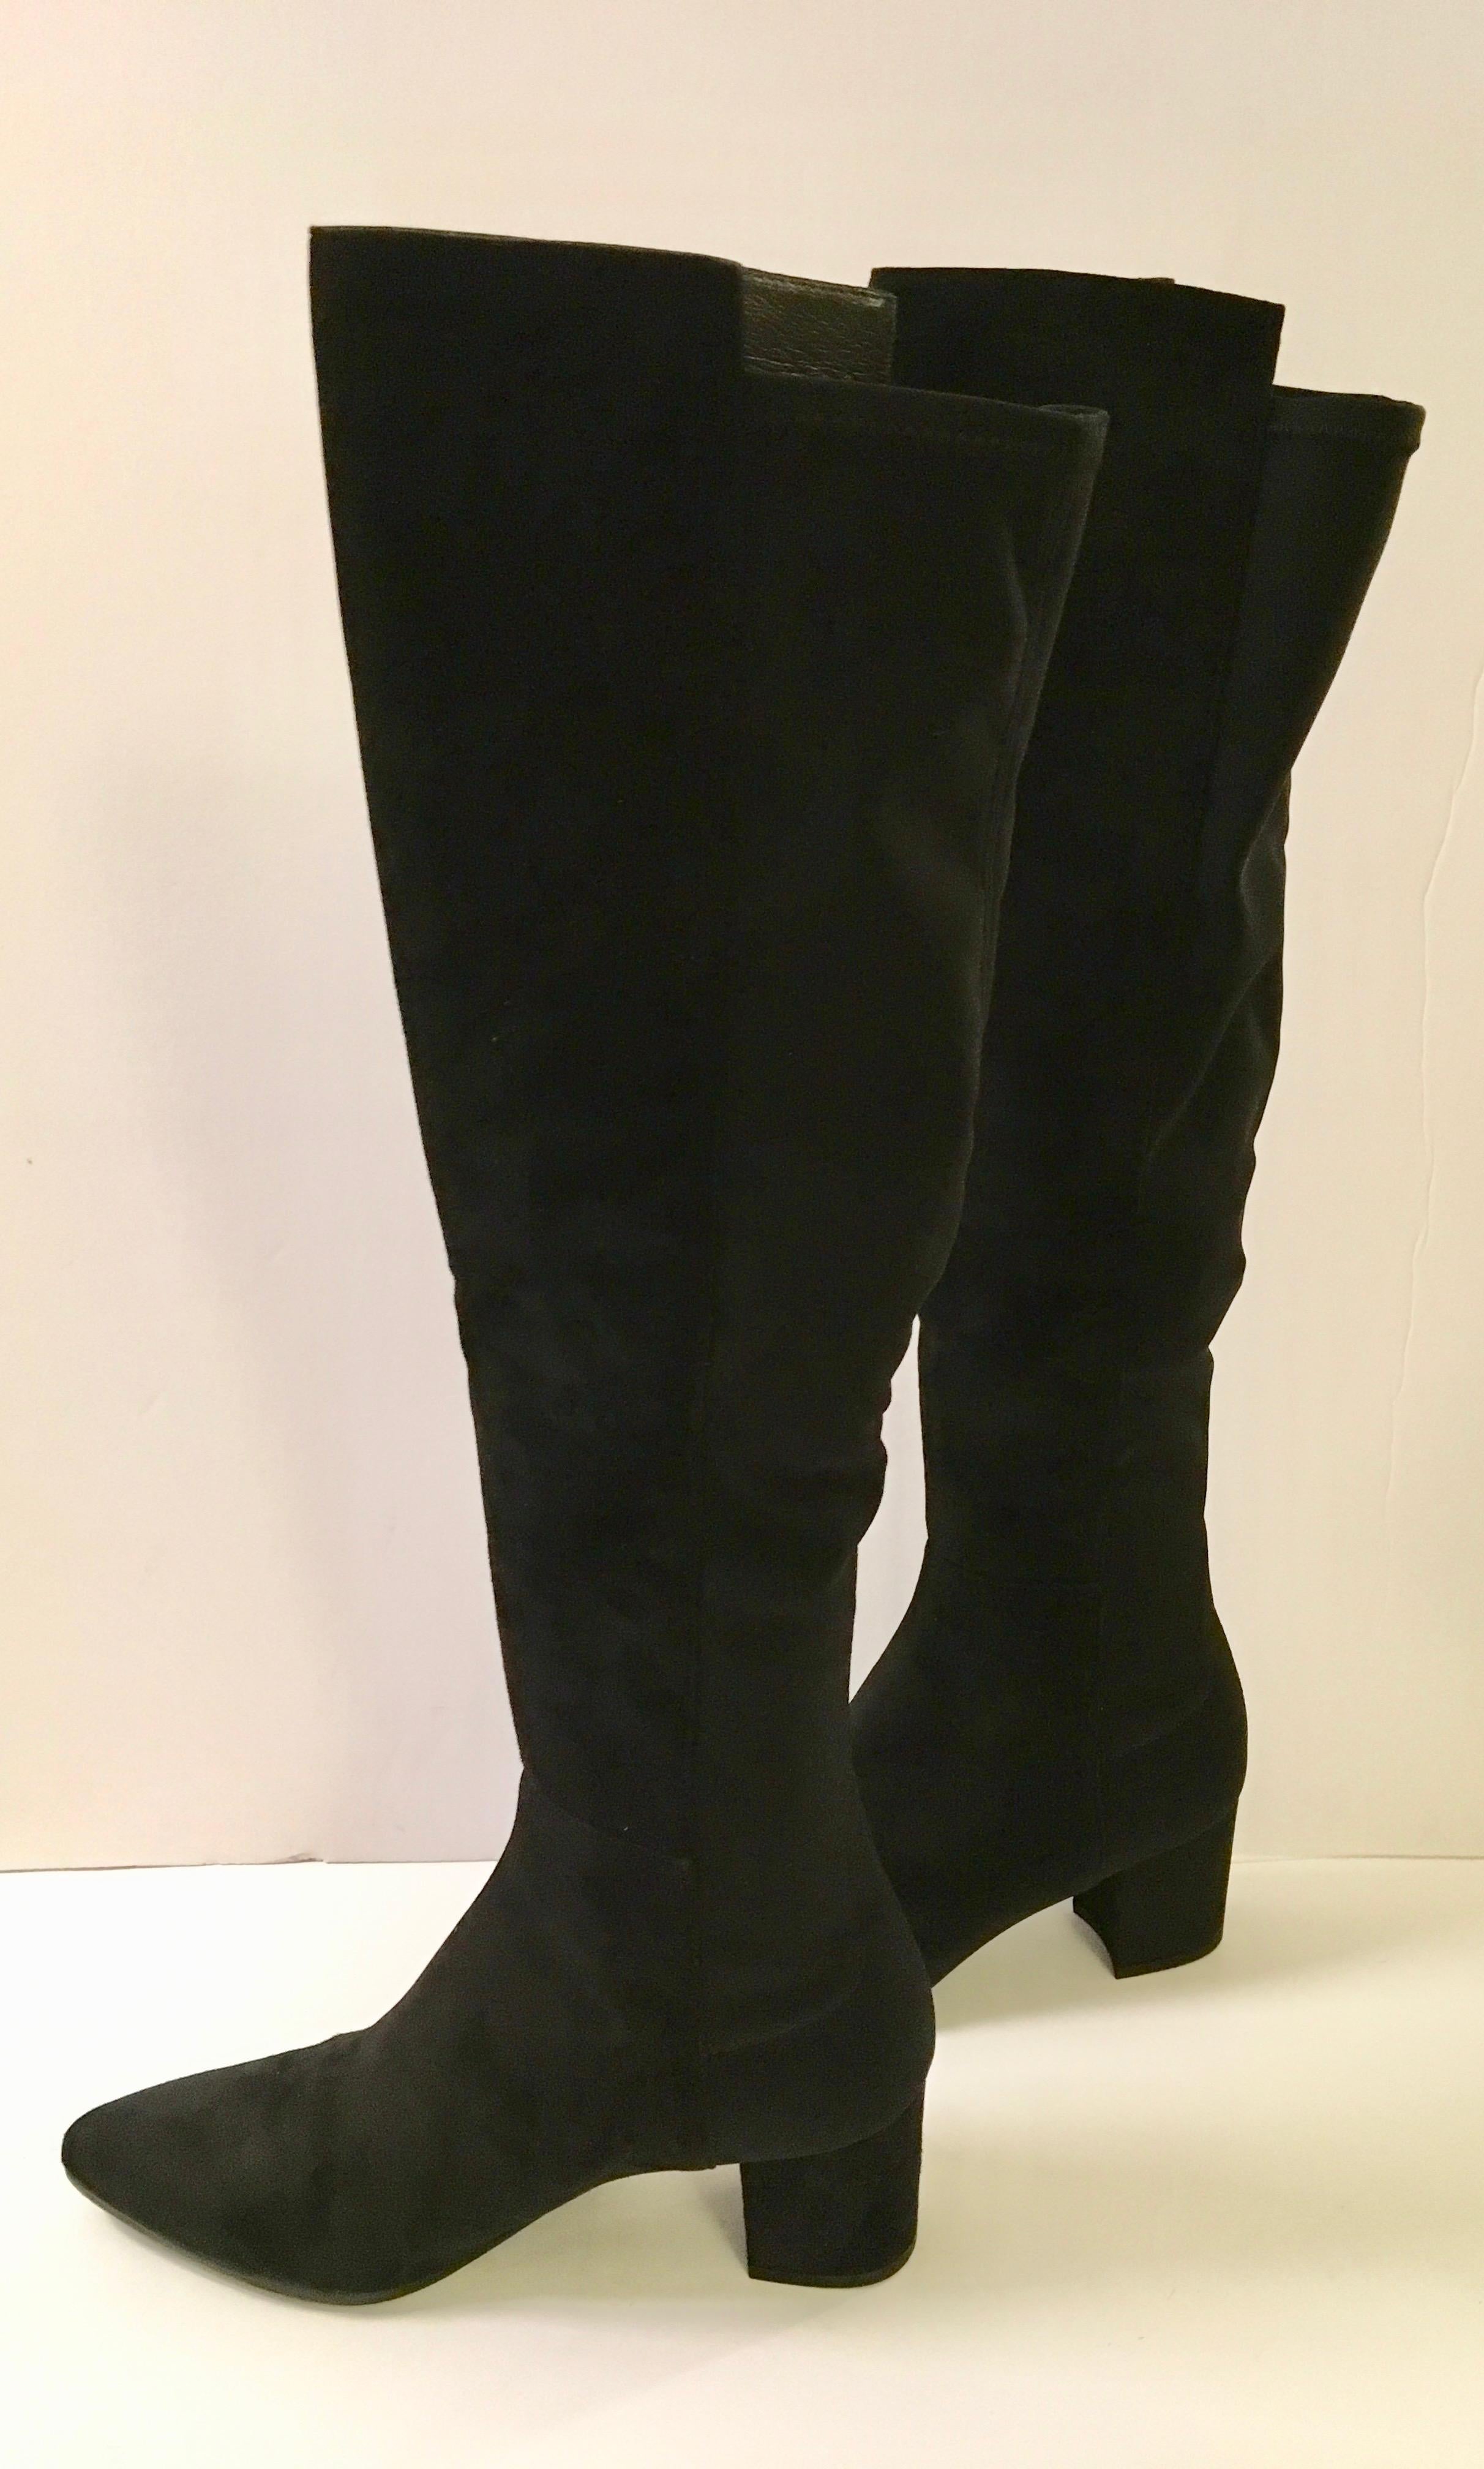 Presented here we have the iconic Stuart Weitzman boot that is what the designer is best known for. It is a must have for any wardrobe. This size 10 boot is new and in its original box. The heel measures 2.5 inches and from the bottom of the heel to